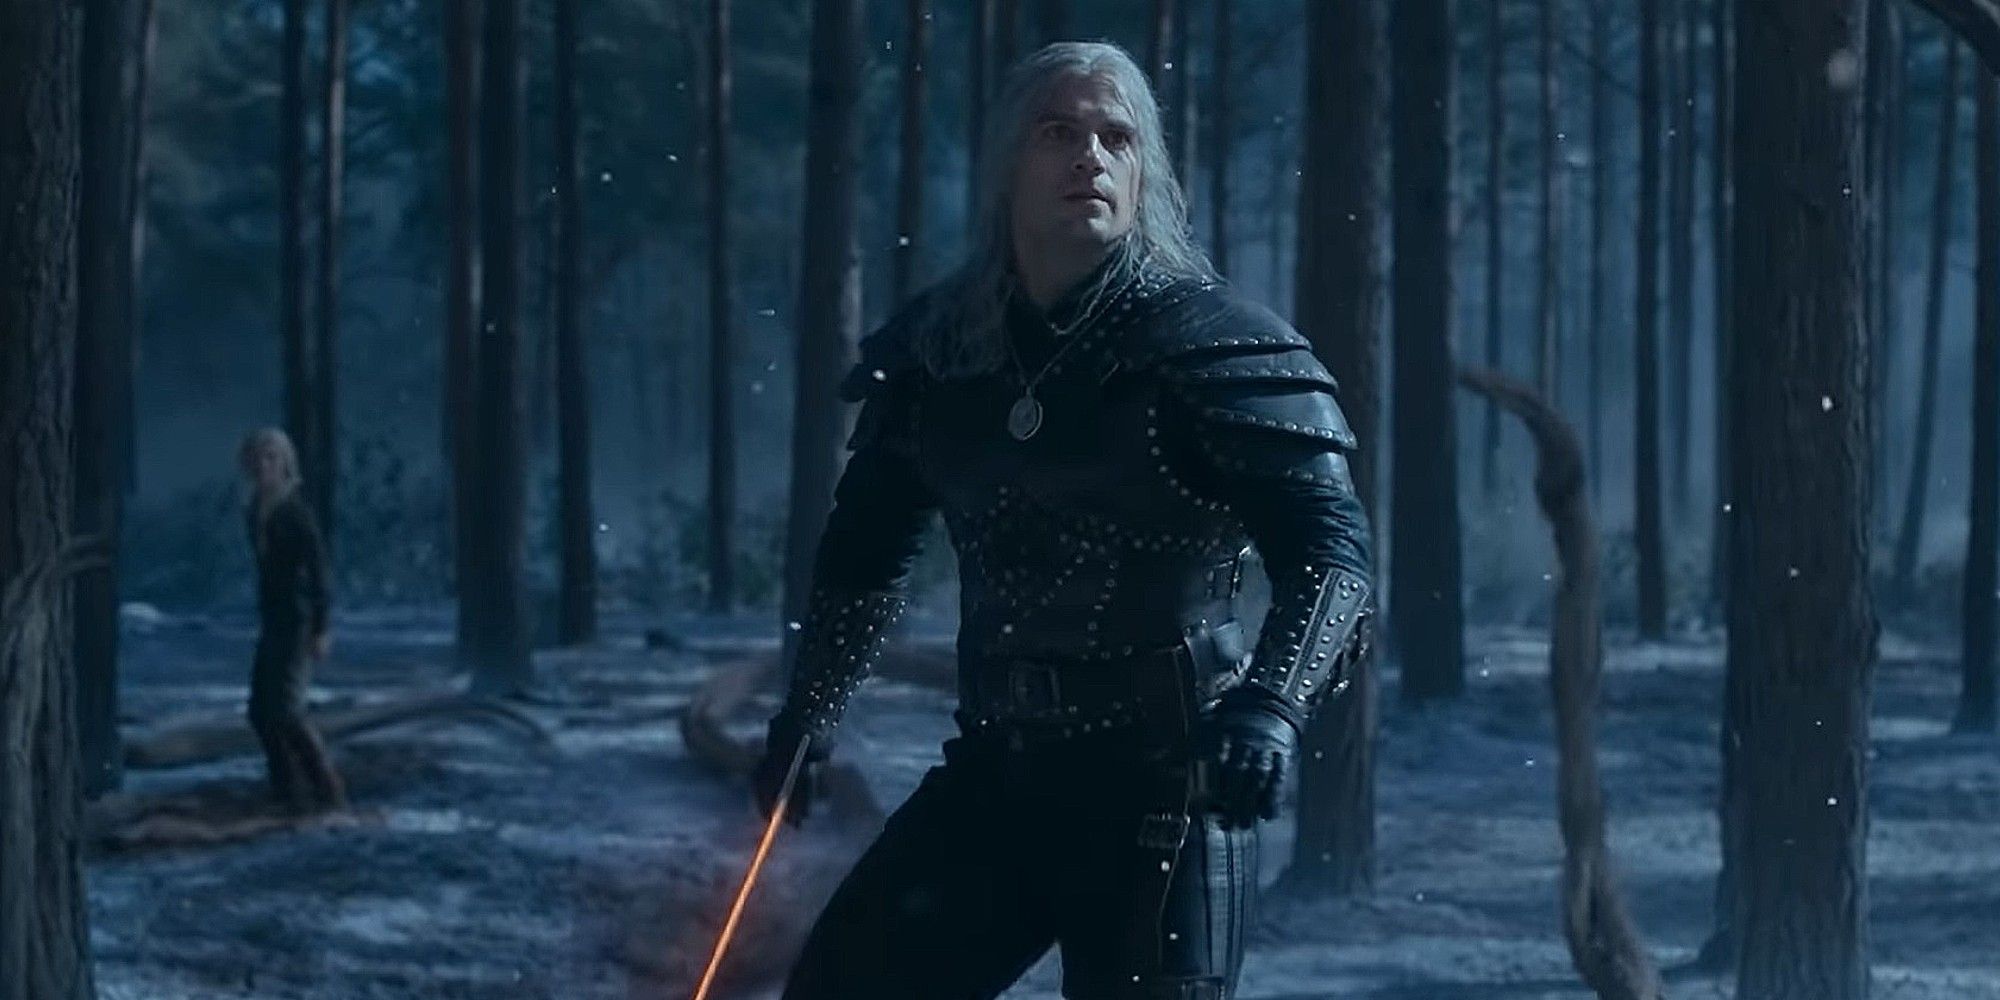 The Witcher Season 2 Is One Of Netflix's Most-Viewed Shows Ever